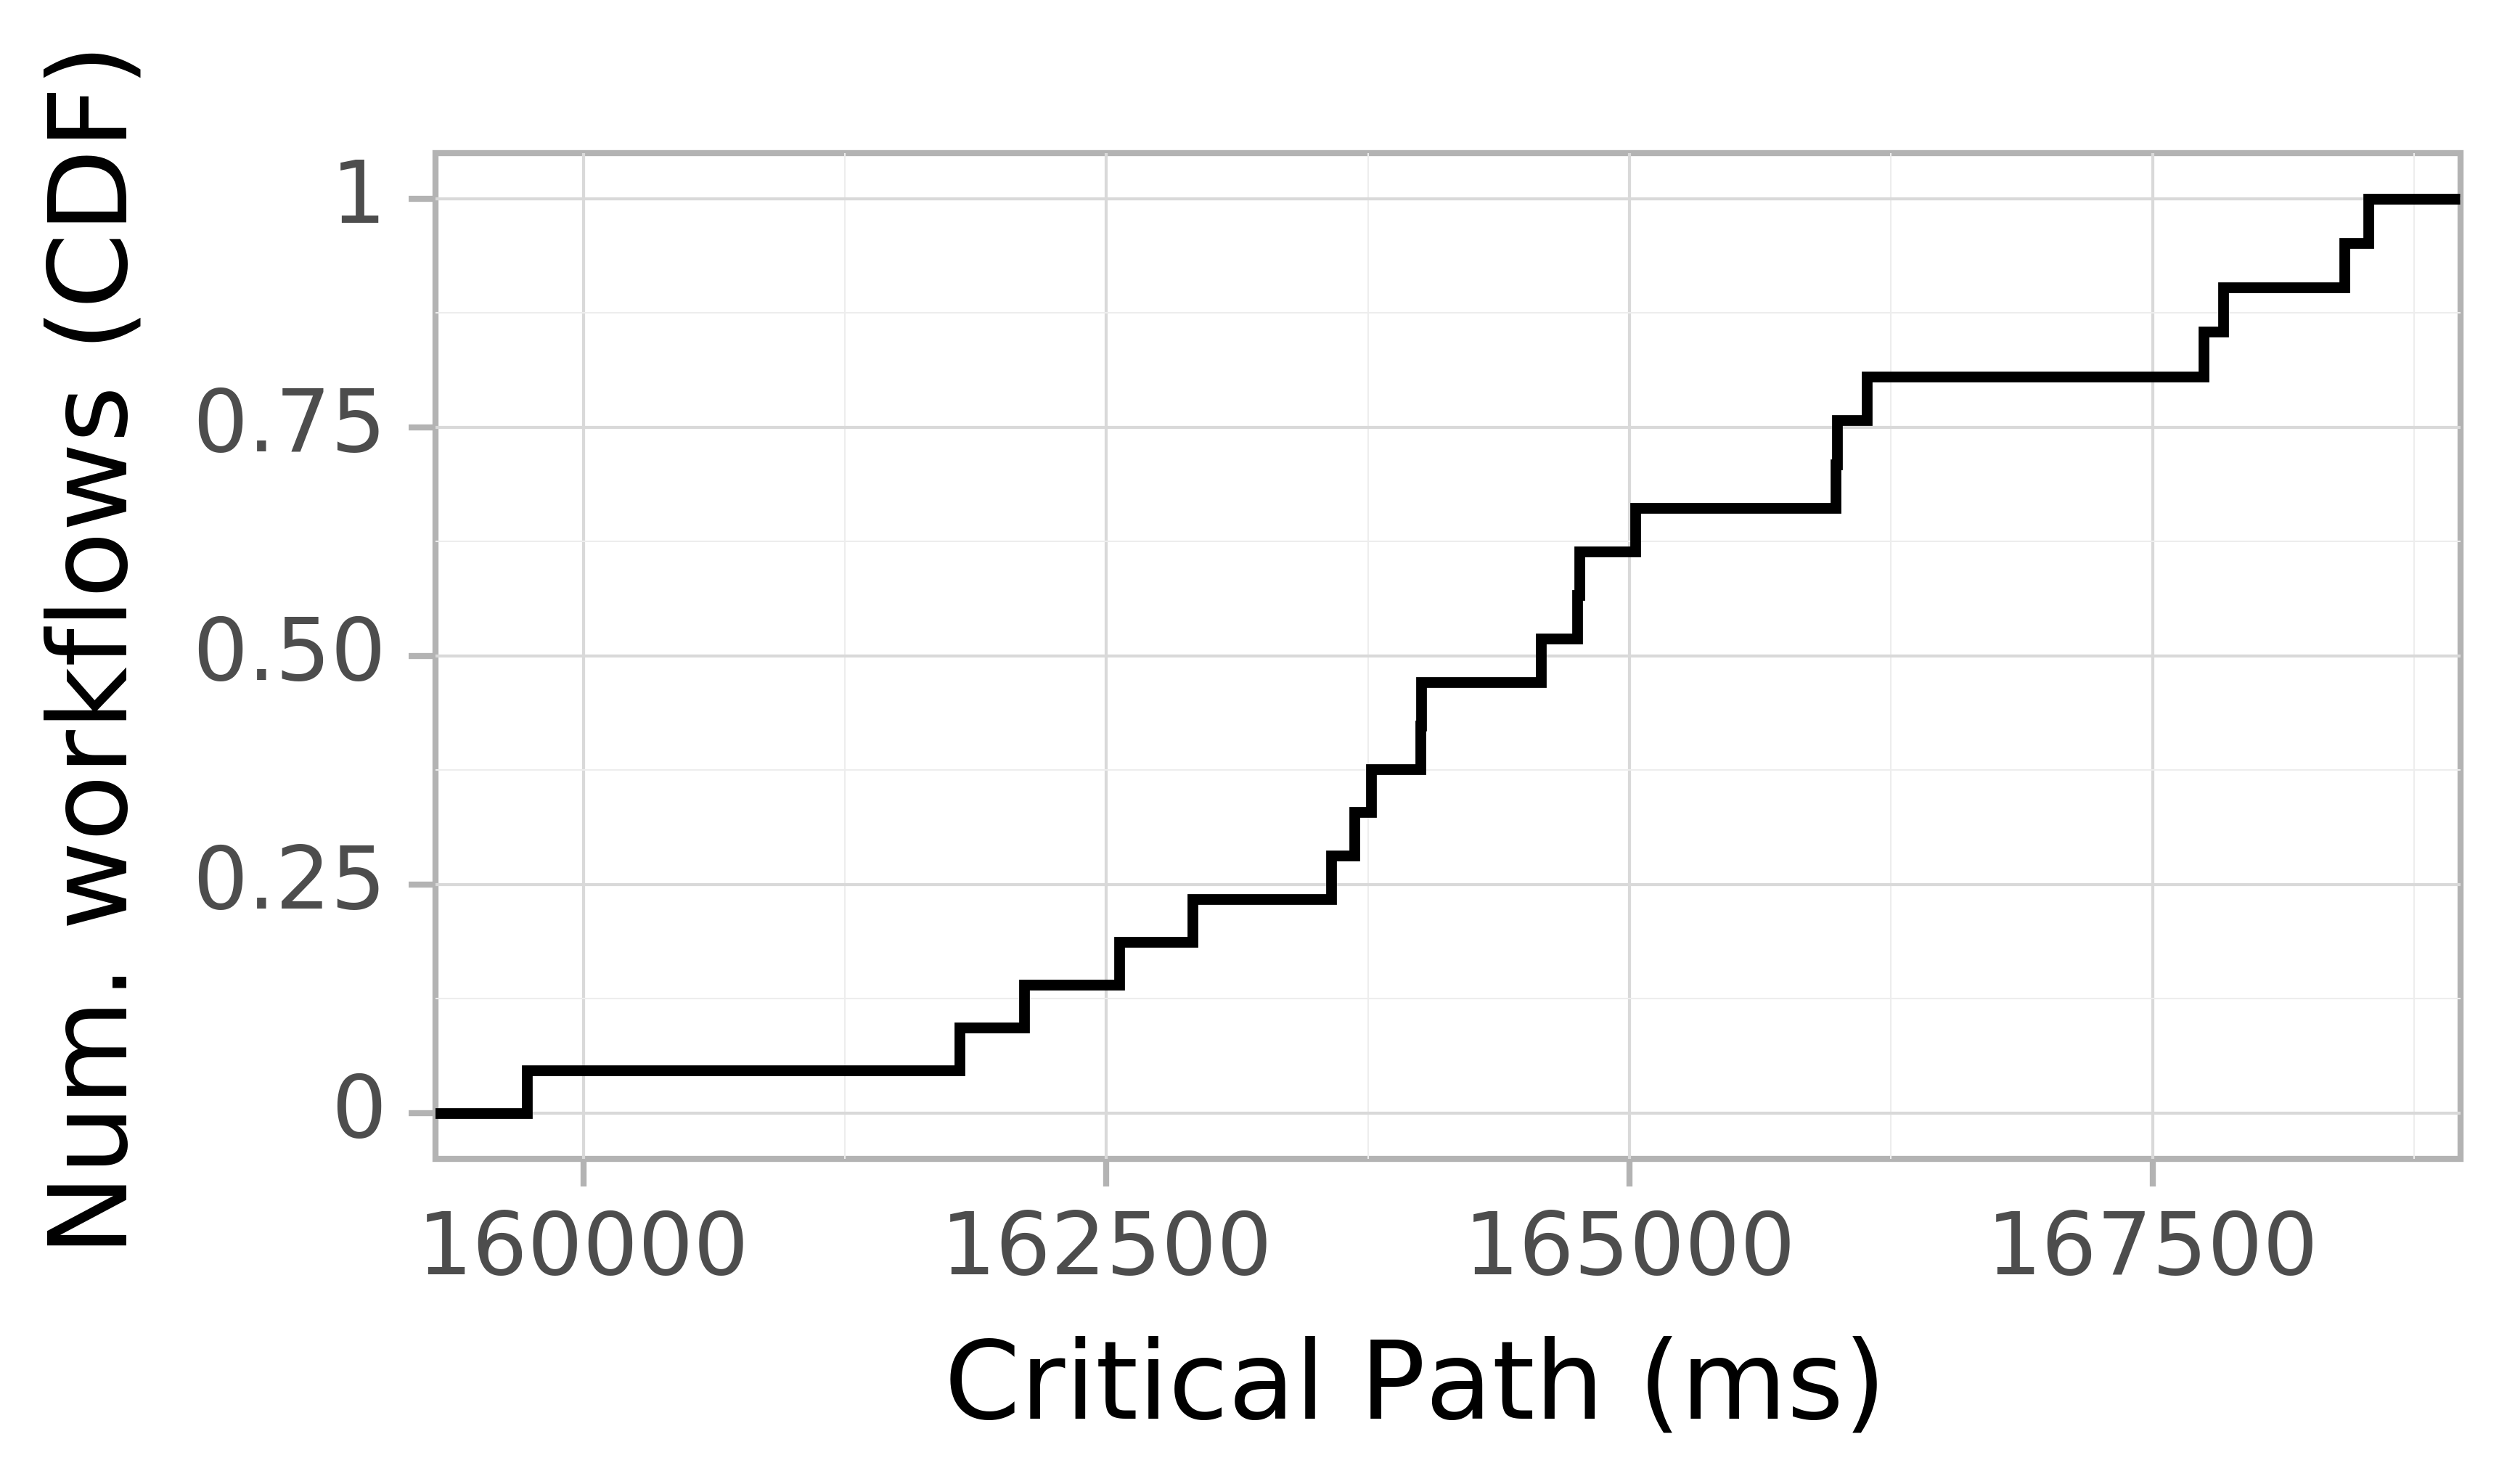 Job runtime CDF graph for the askalon-new_ee61 trace.